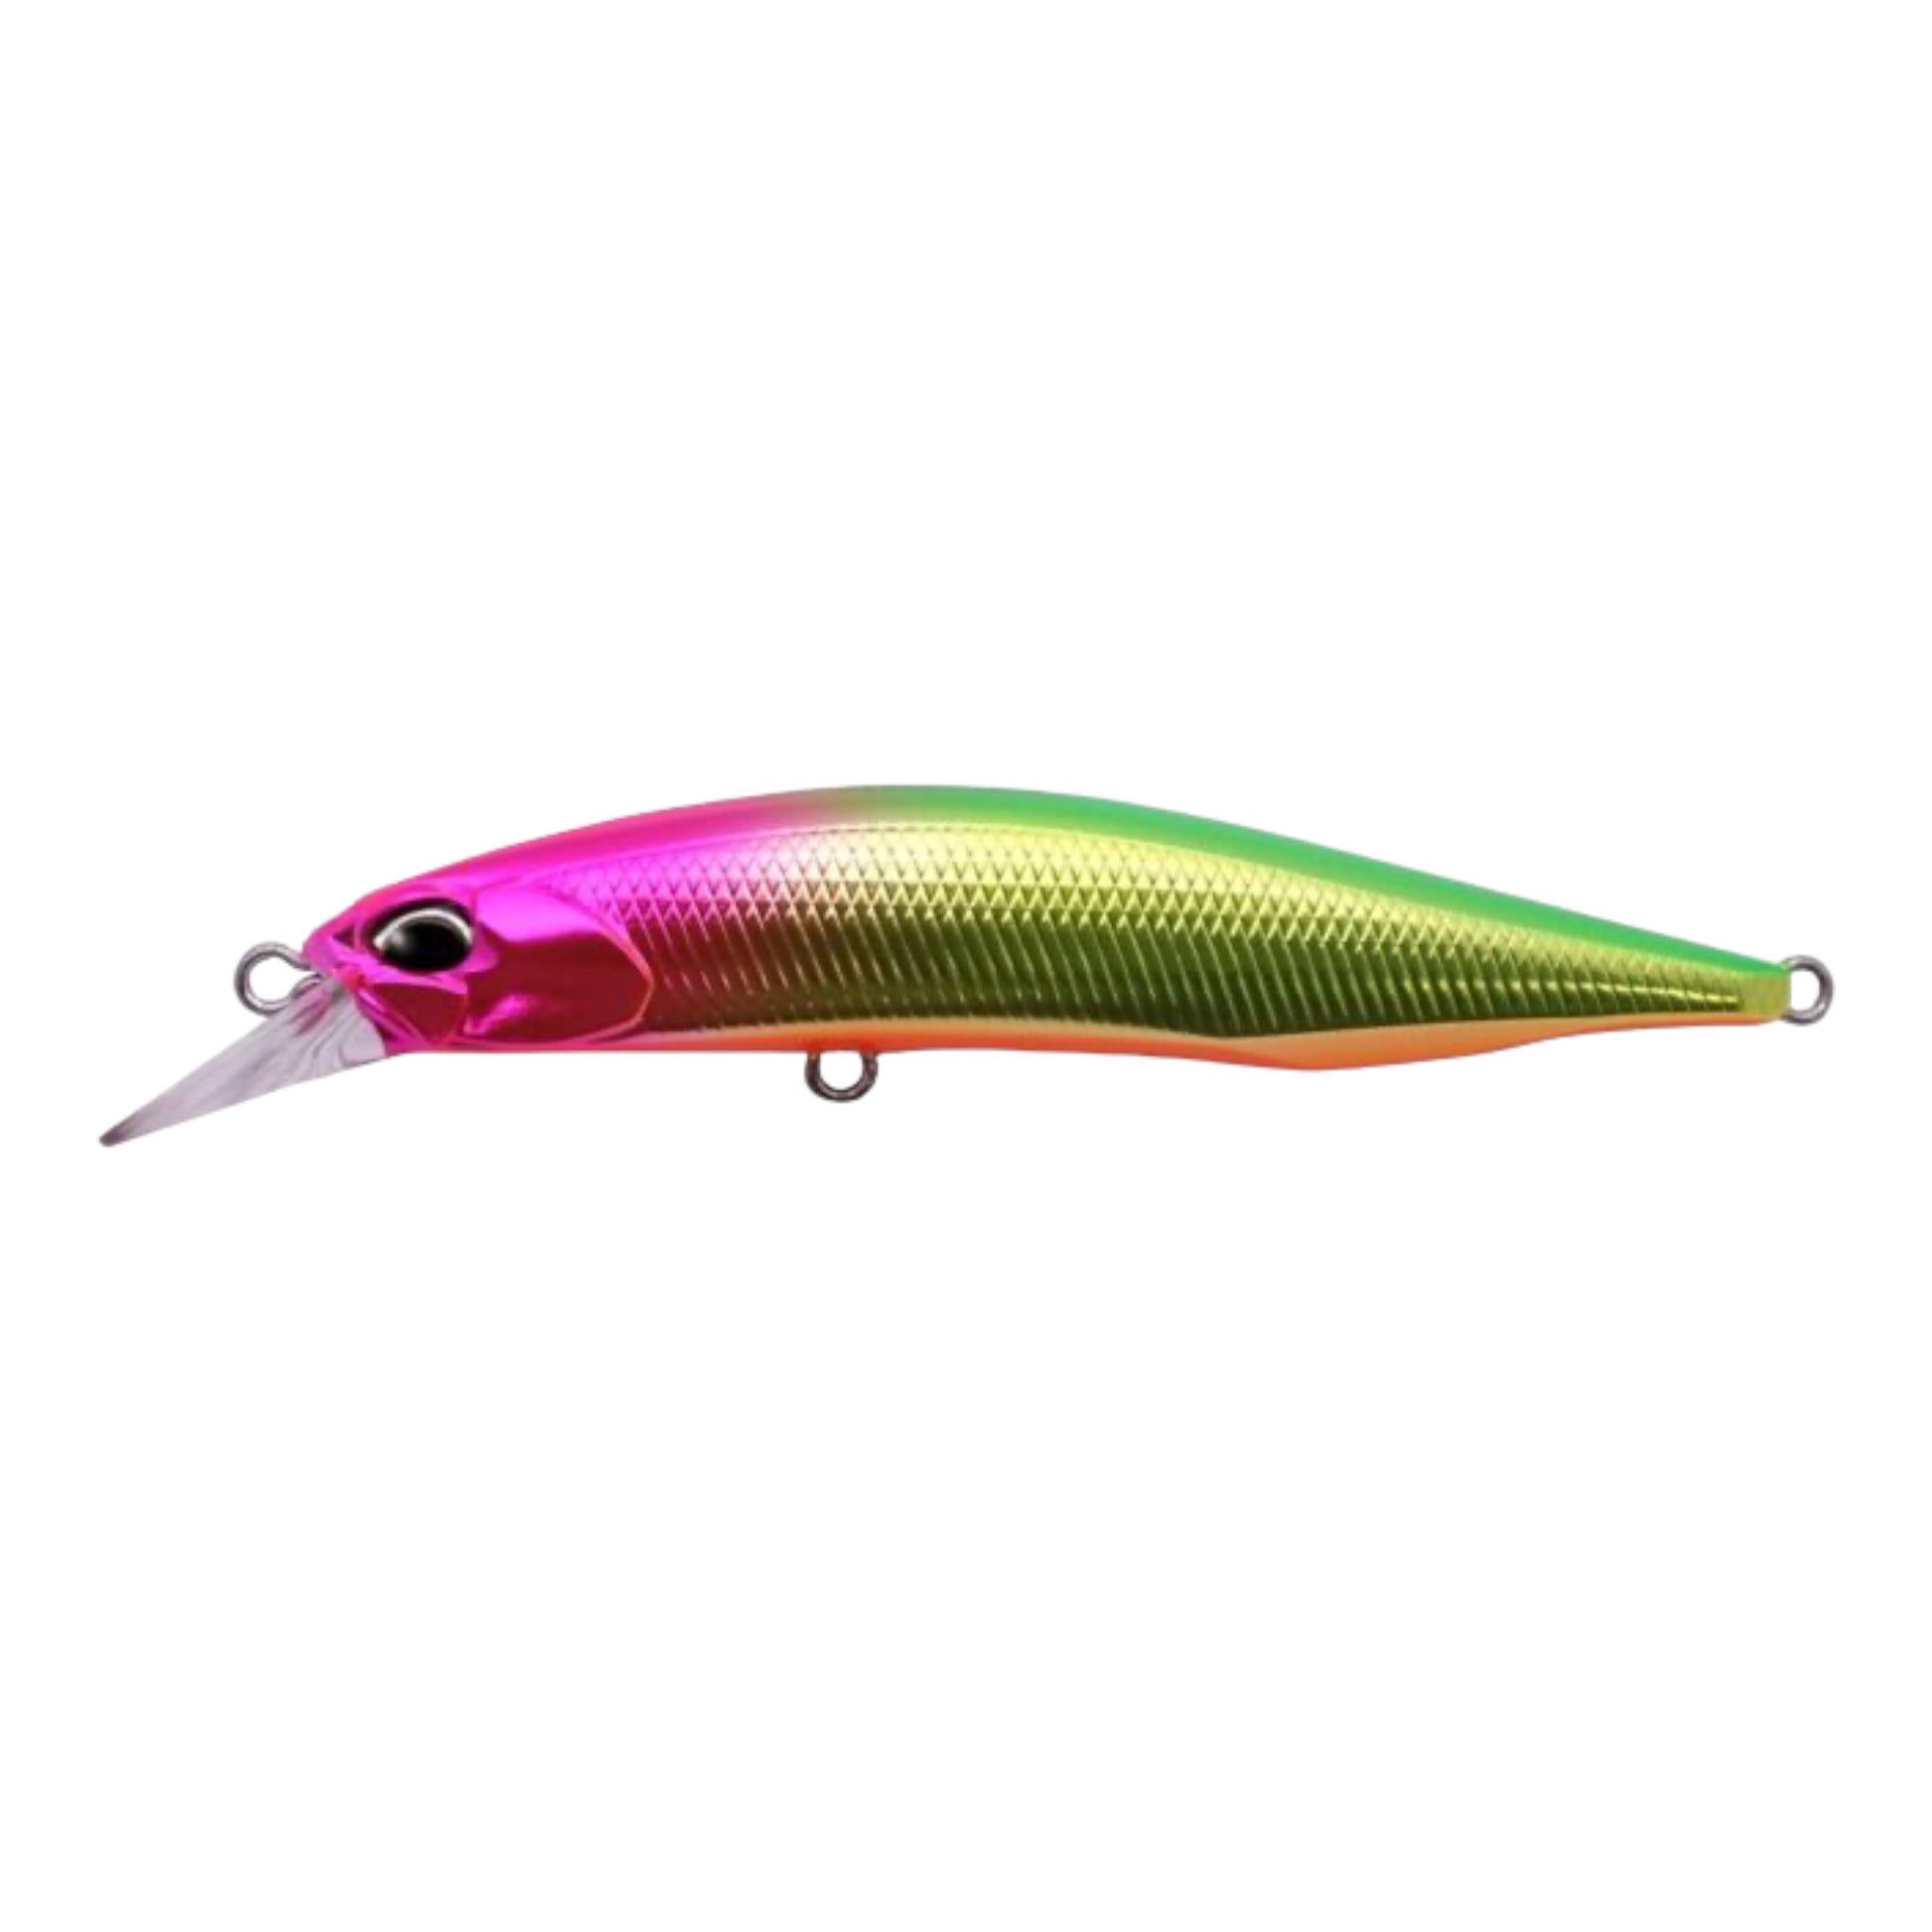 DUO Realis JerkBait 85F # CCCZ276 Red Head Special Lures buy at